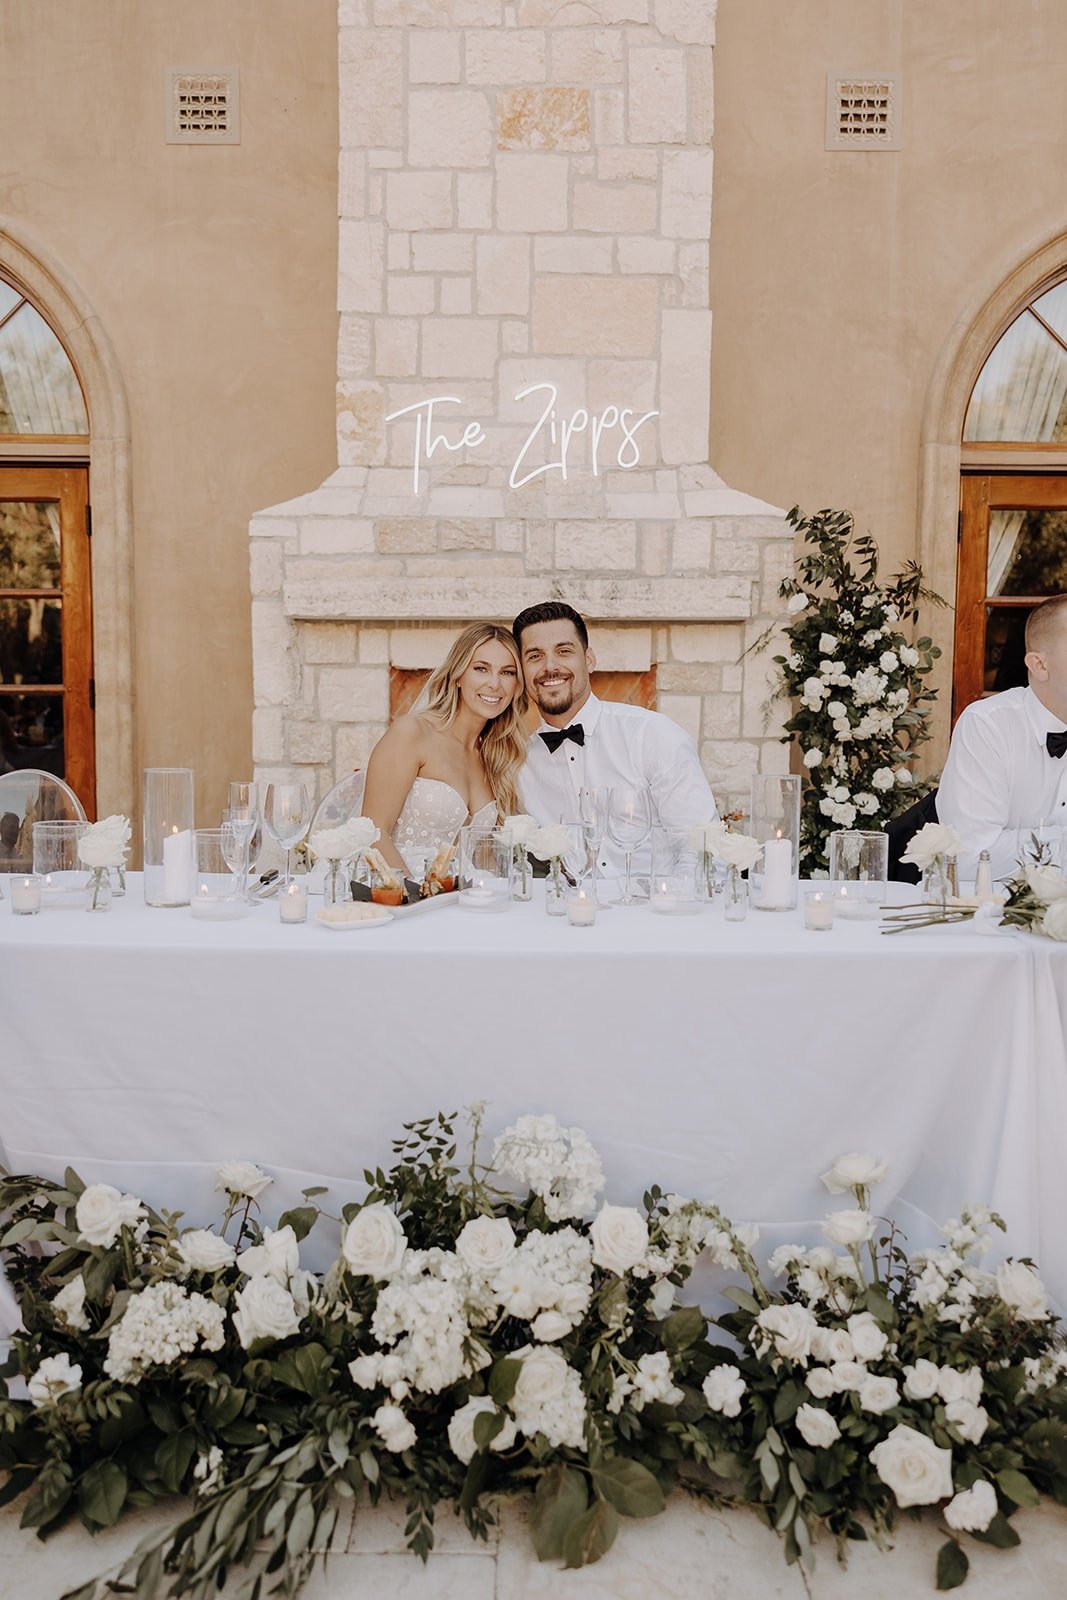 Bride and groom sit at the head table during luxury wedding reception at Allegretto Vineyard Resort